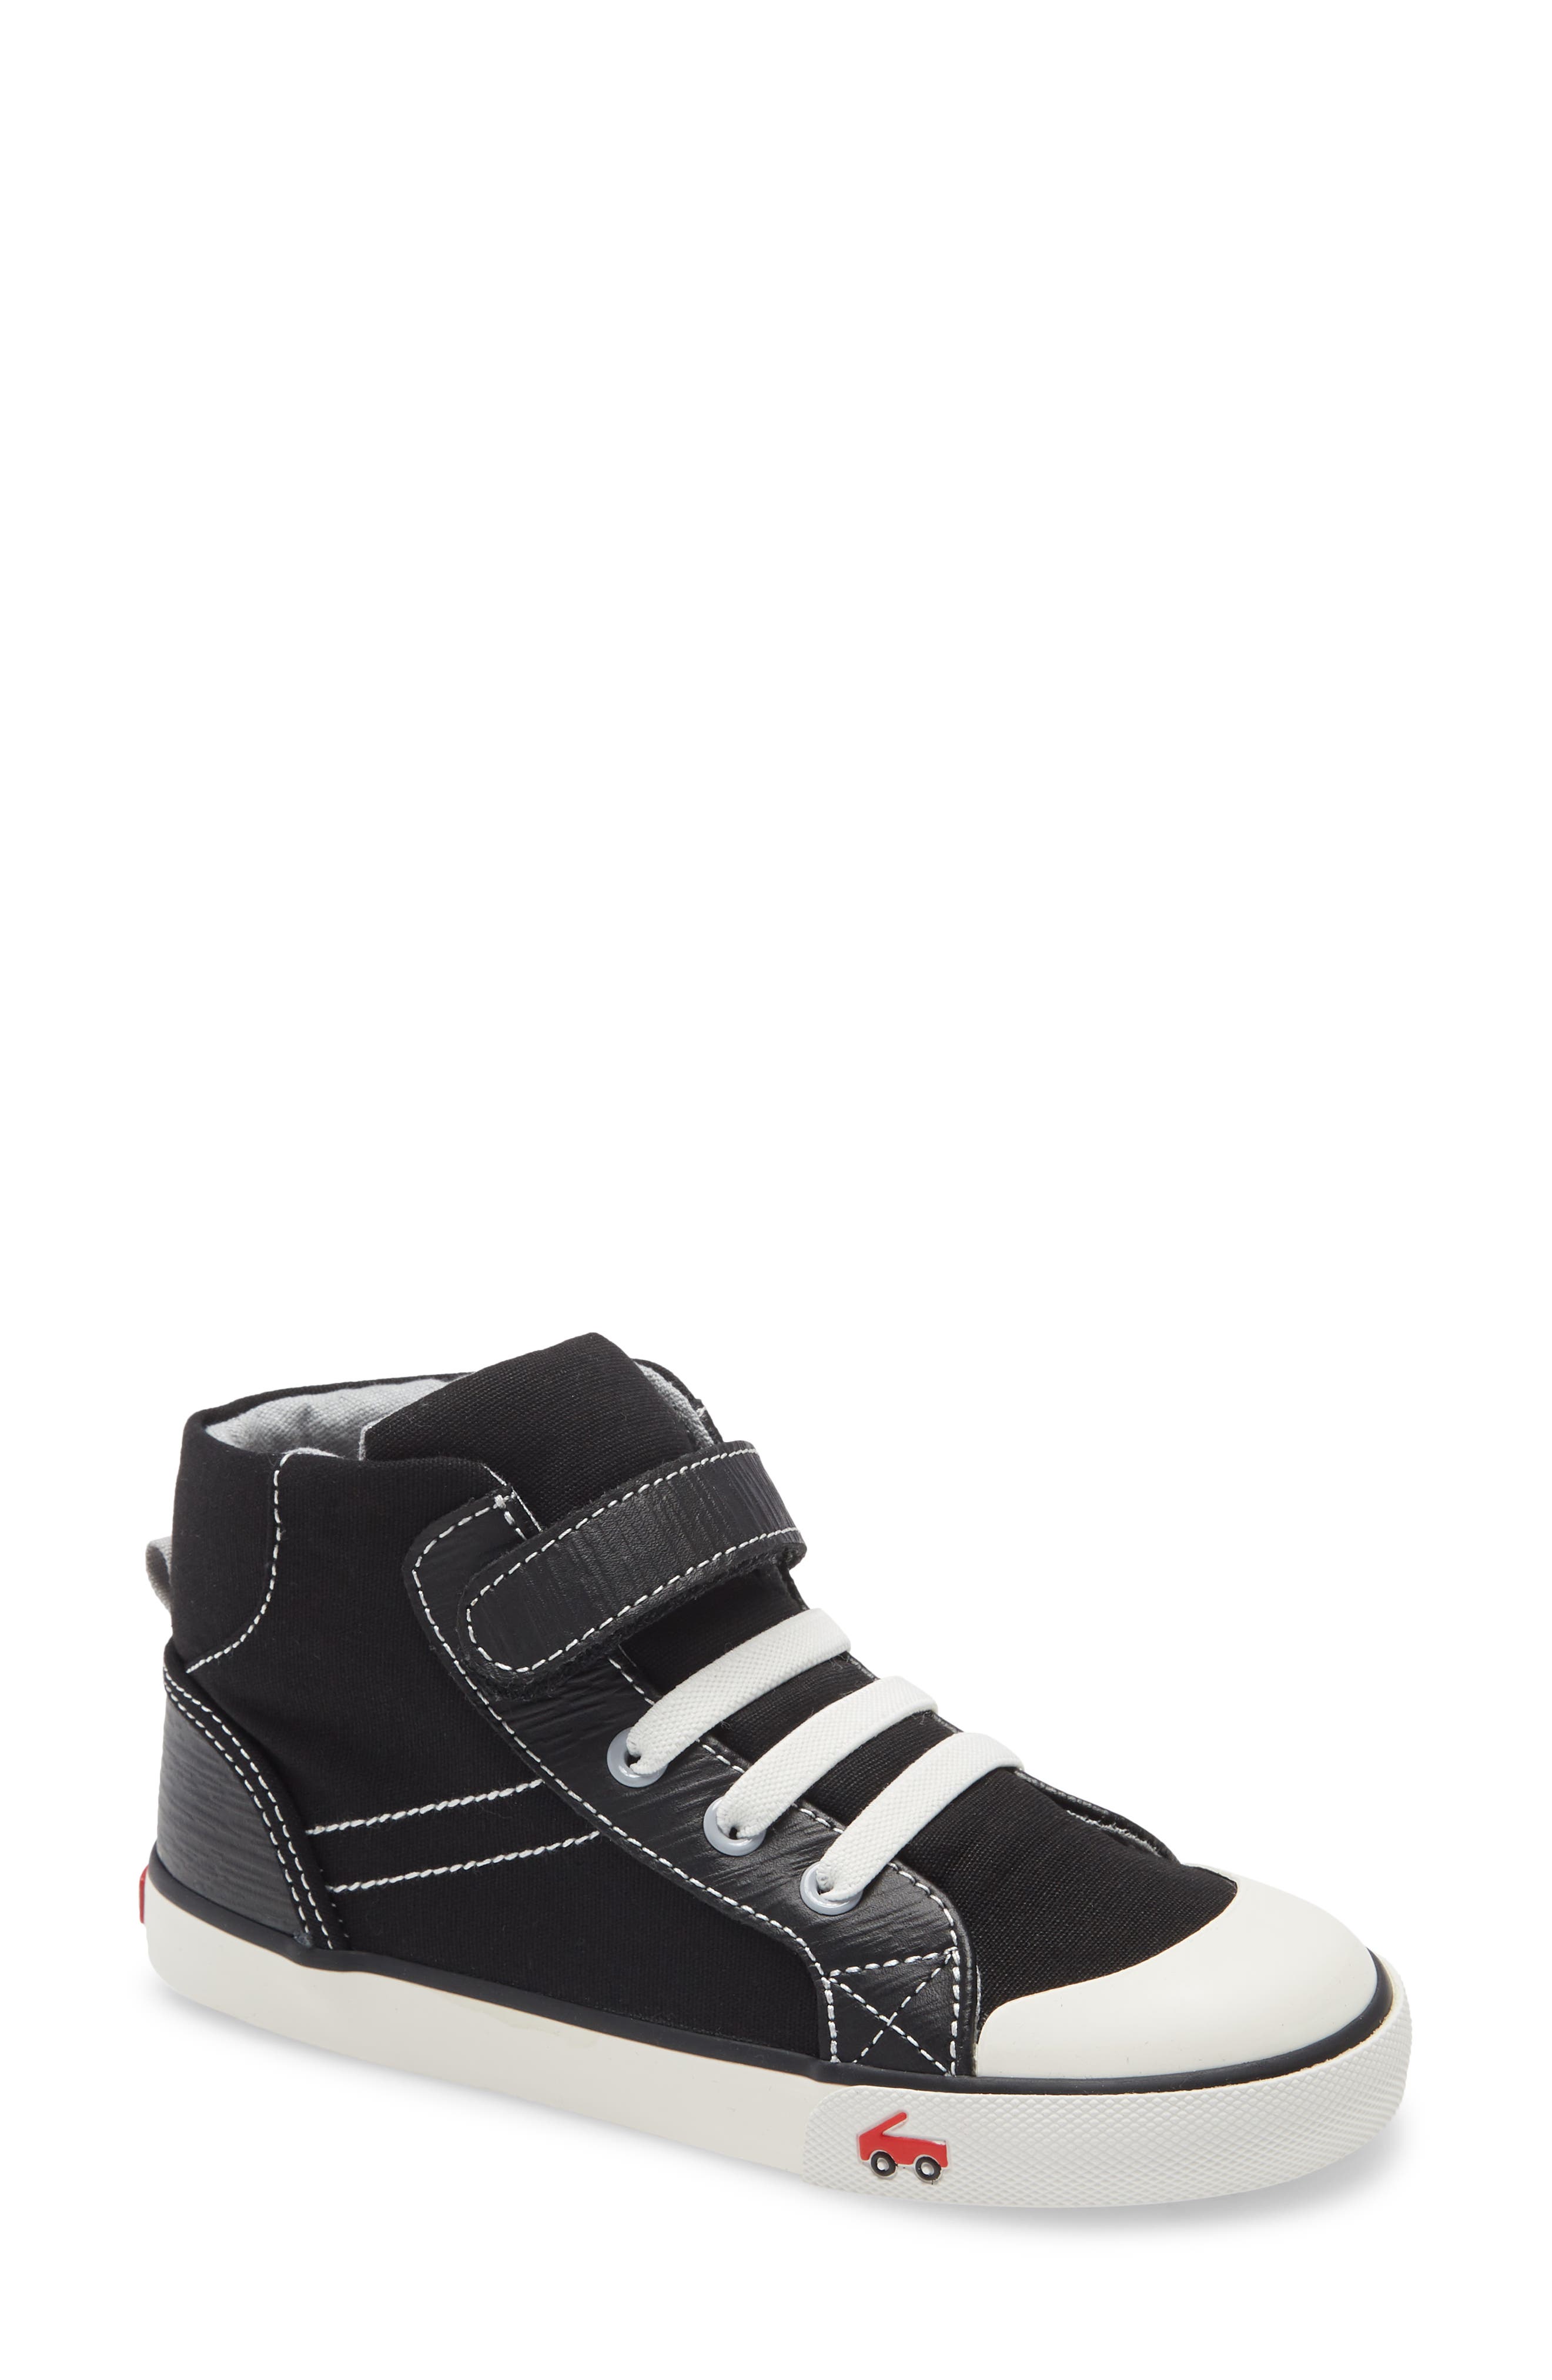 Toddler Girl High Top Tennis Shoes Pasteurinstituteindia Com